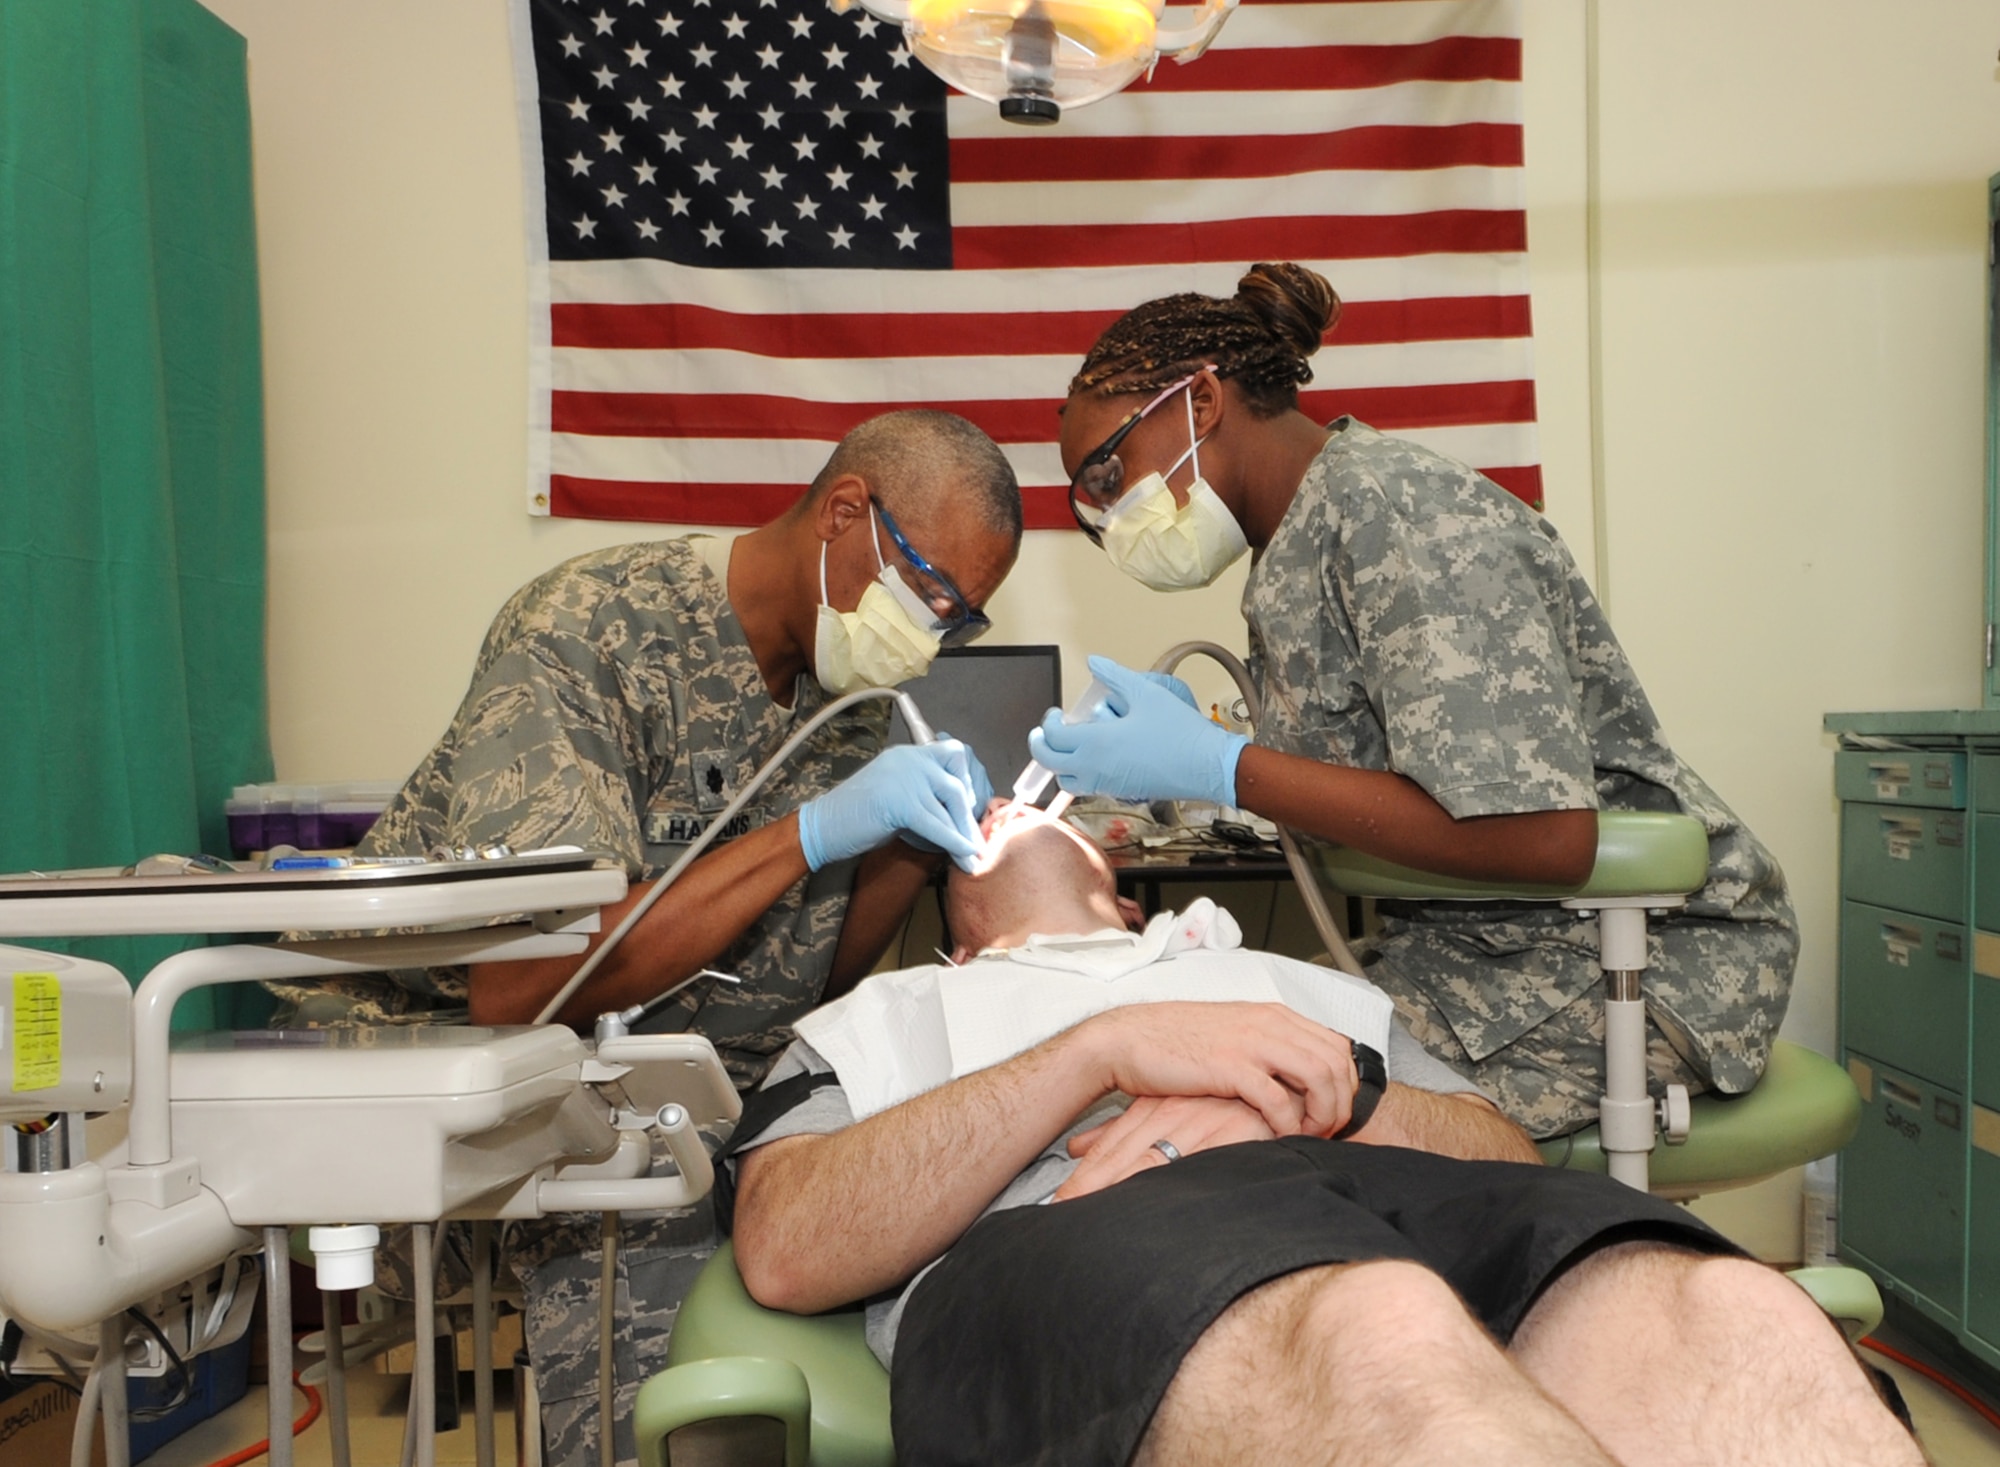 U.S. Air Force Lt. Col. Val Hagans, 506th Expeditionary Medical Squadron dentist and U.S. Army Spc. Laketa Bryant, 501st Brigade Support Battalion dental specialist, extract a patient’s wisdom teeth at Kirkuk Regional Air Base, Iraq on April 13, 2010.  Colonel Hagans is deployed from 96th Dental Squadron at Eglin AFB, Fla. (U.S. Air Force photo/Staff Sgt. Tabitha Kuykendall/Released)